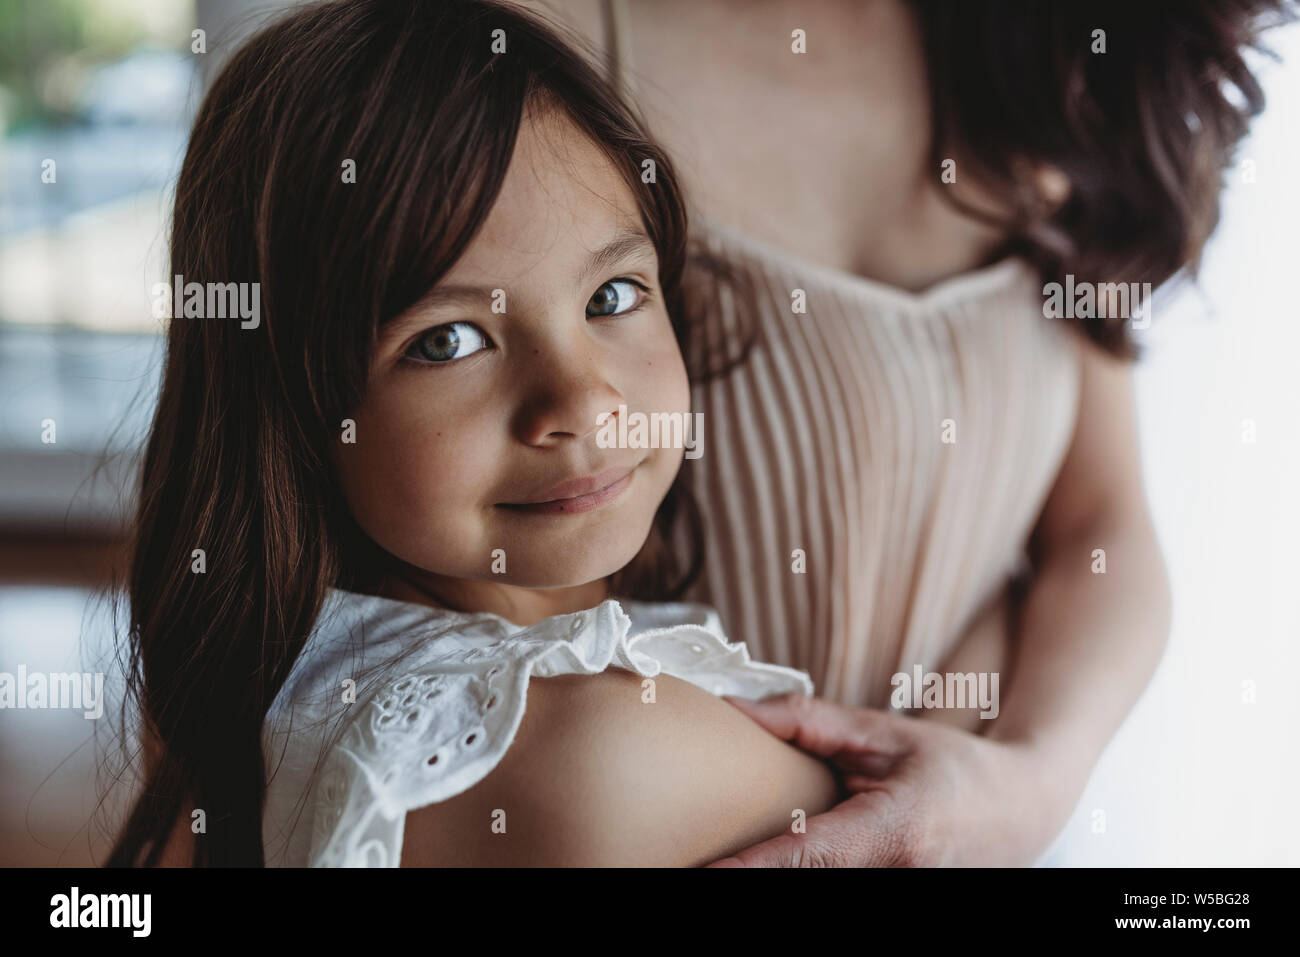 Close up view of school aged girl being hugged by mother Stock Photo